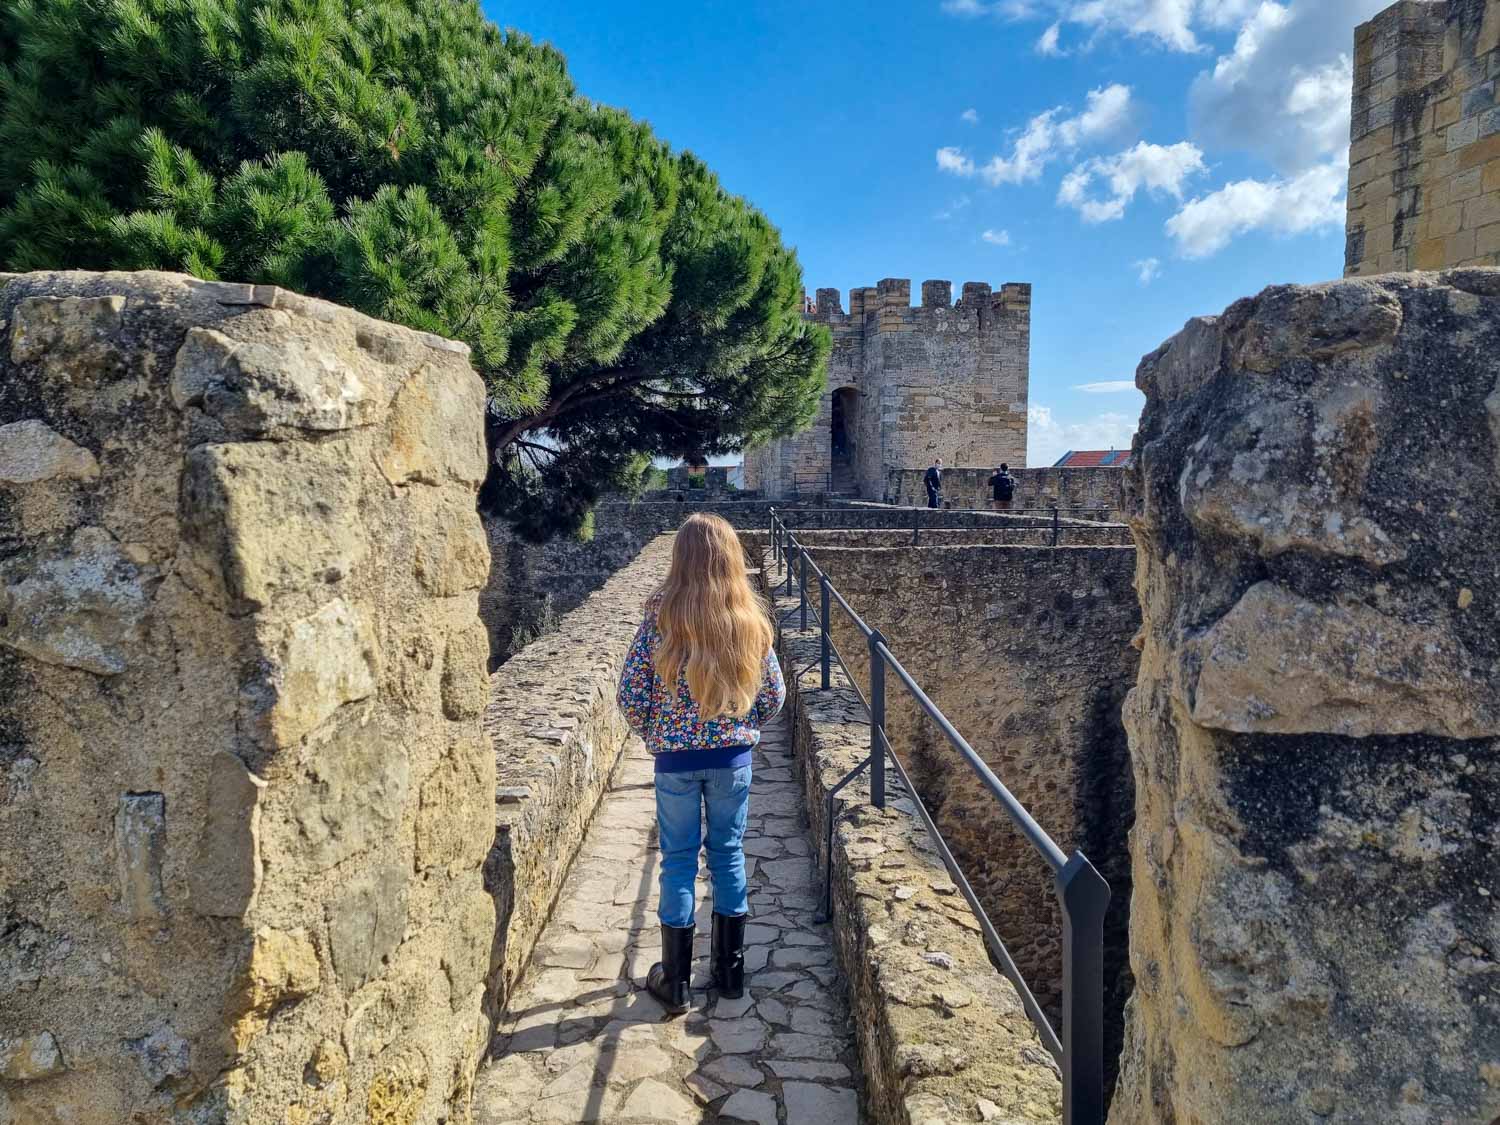 My daughter walks along the walls of Castelo de Sao Jorge, the historic castle in Lisbon on a sunny day - one of my top things to do in Lisbon with kids